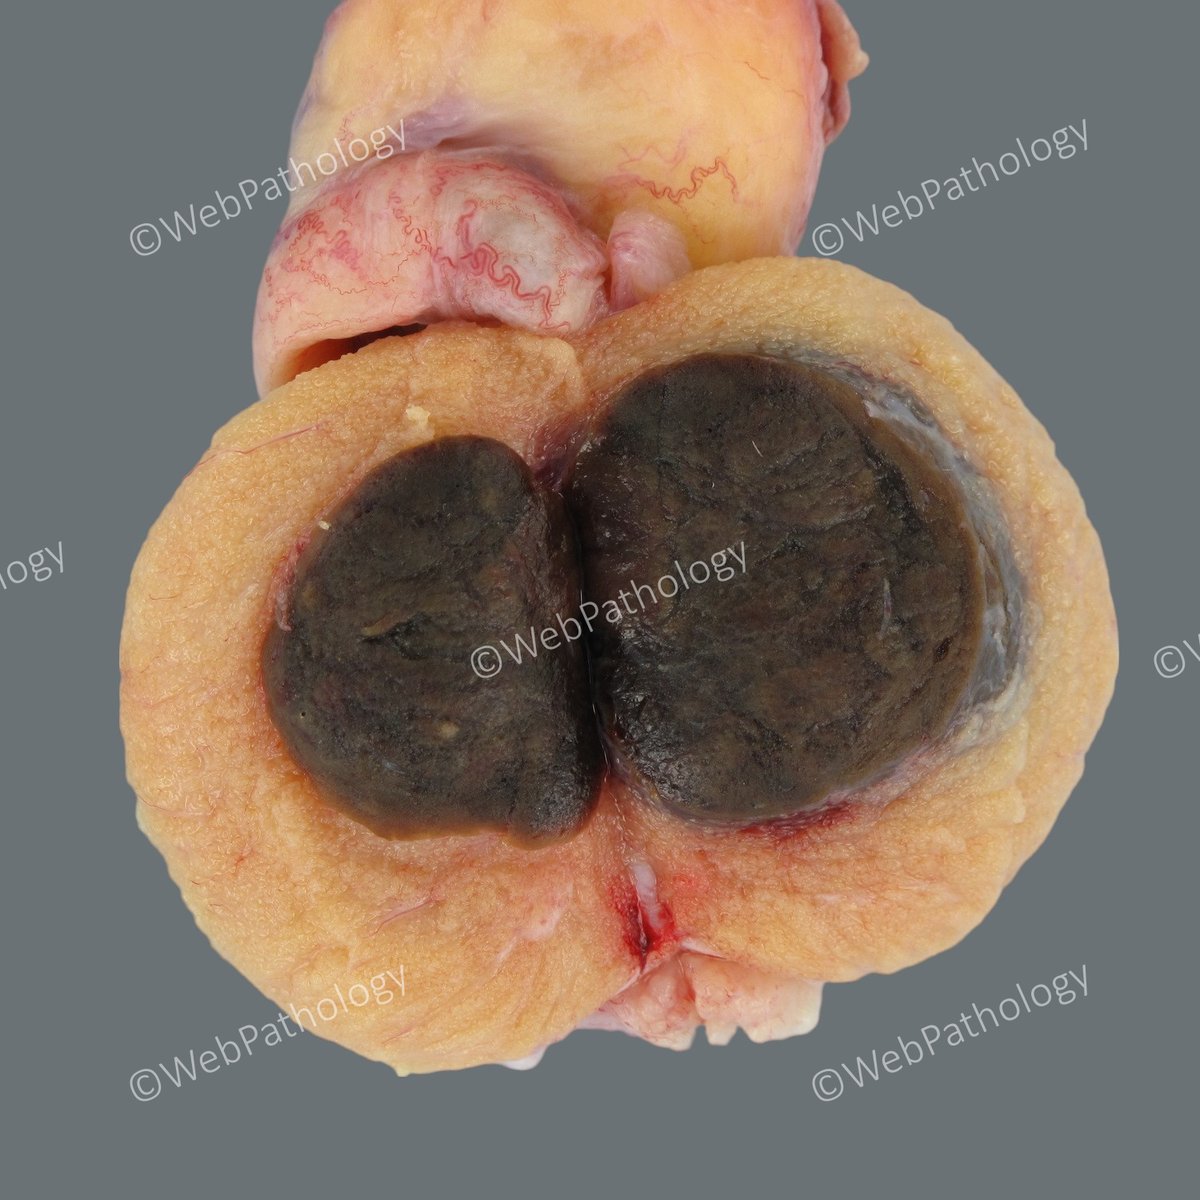 Testicular Neoplasms. Case 2: Adult male (> 35 yrs) with a testicular mass. Any guesses based on macroscopic appearance? Clinical info. and labs. to follow soon. #PathTwitter #PathResidents #GUPath